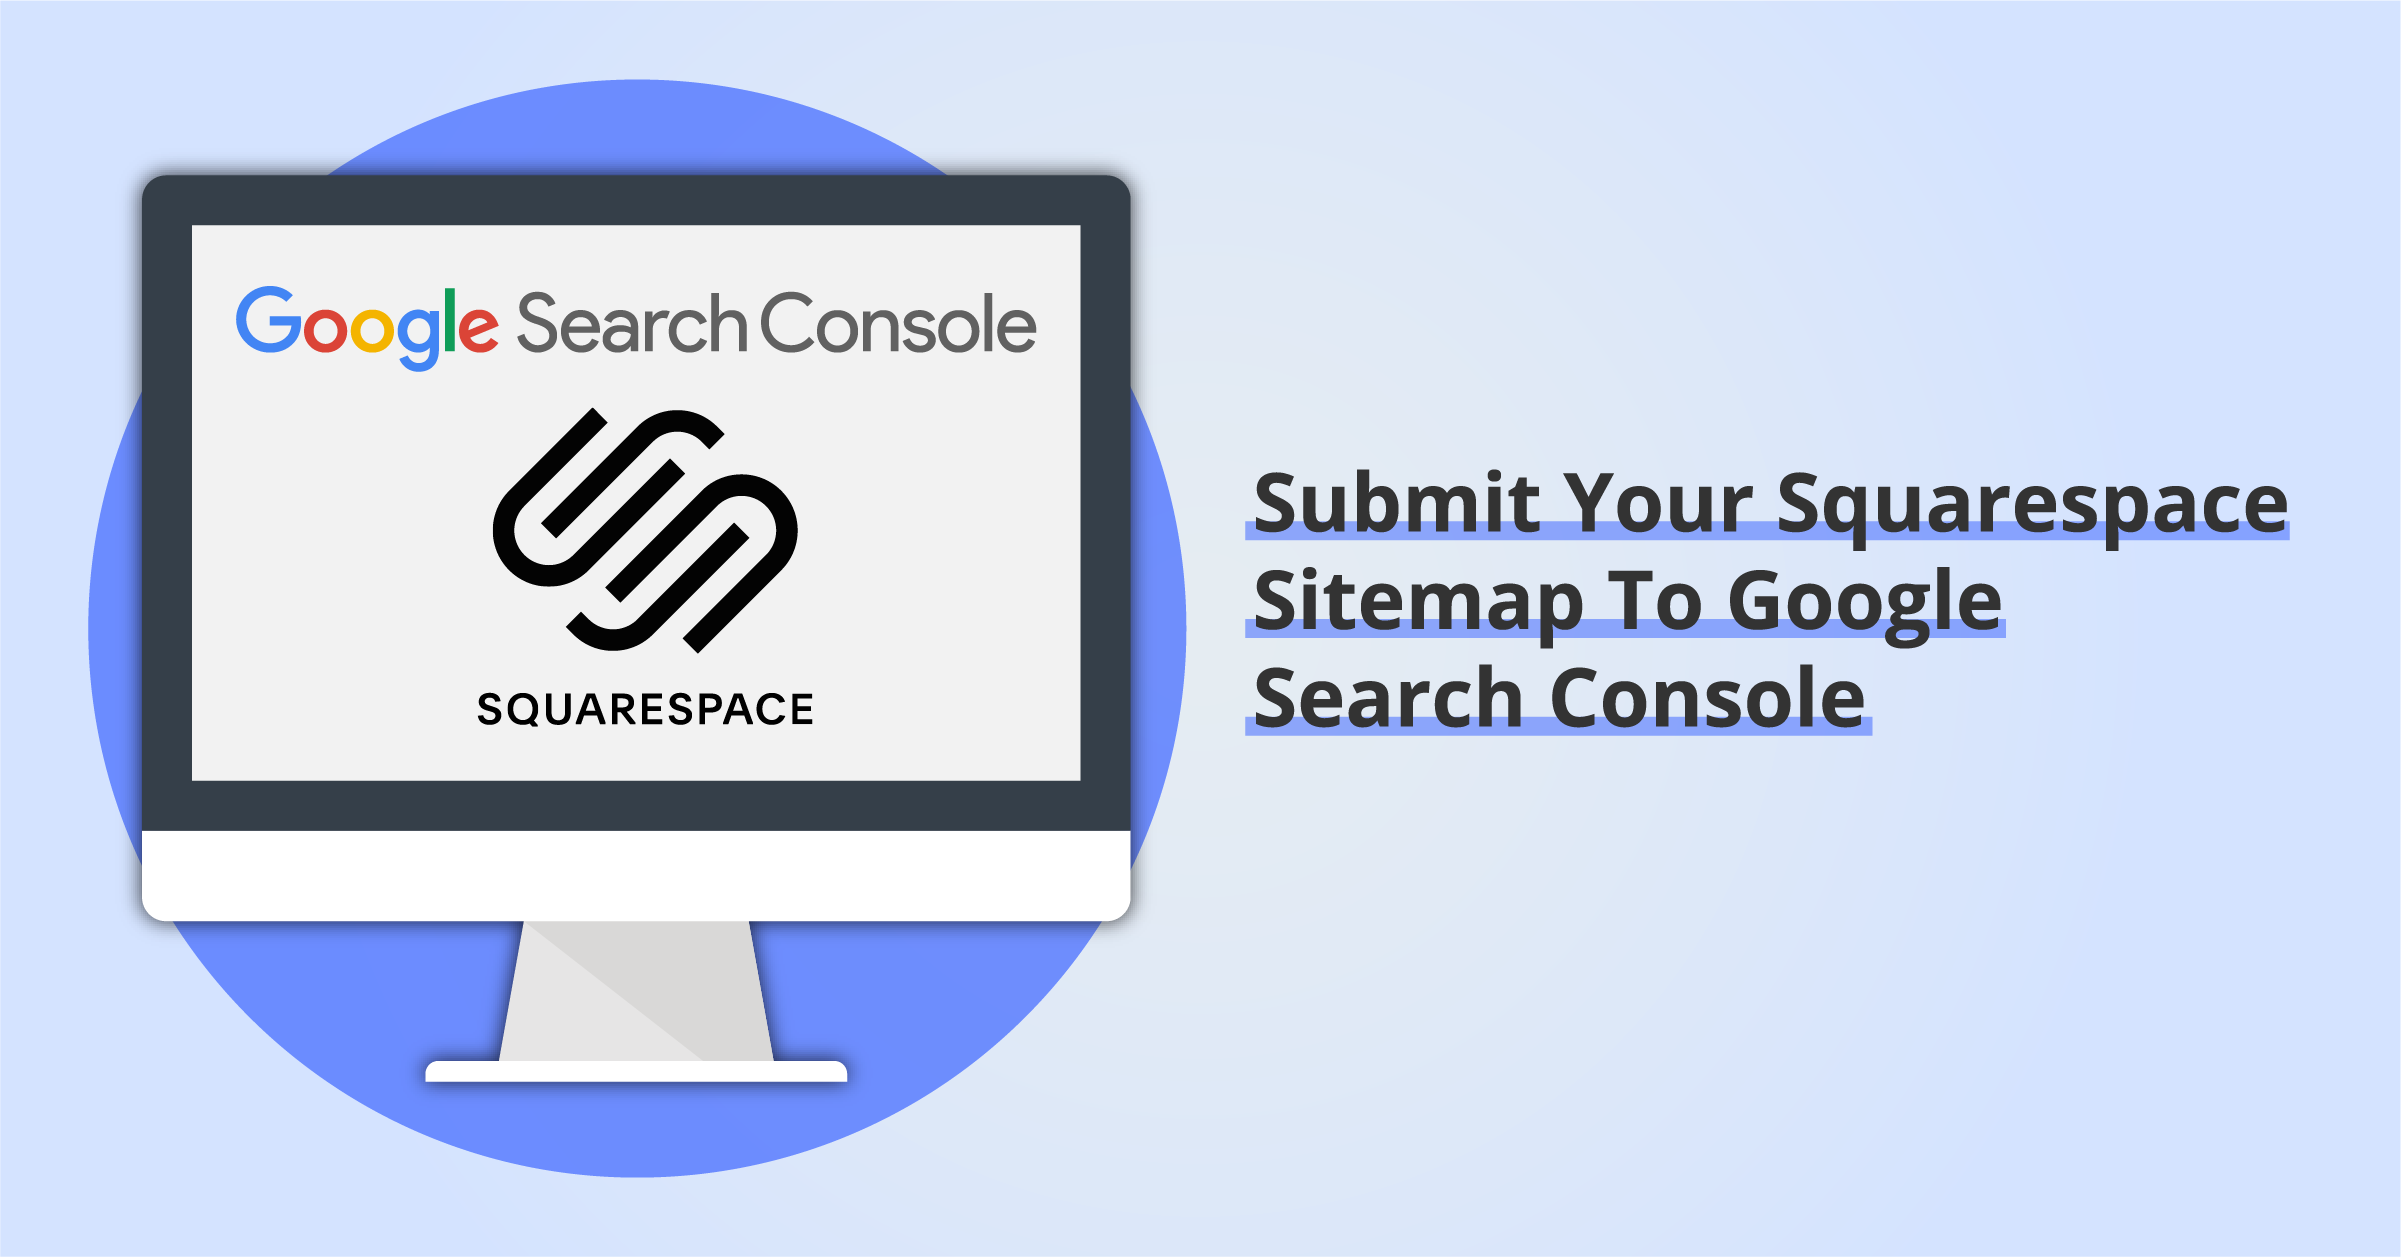 Submit your Squarespace sitemap to Google Search Console